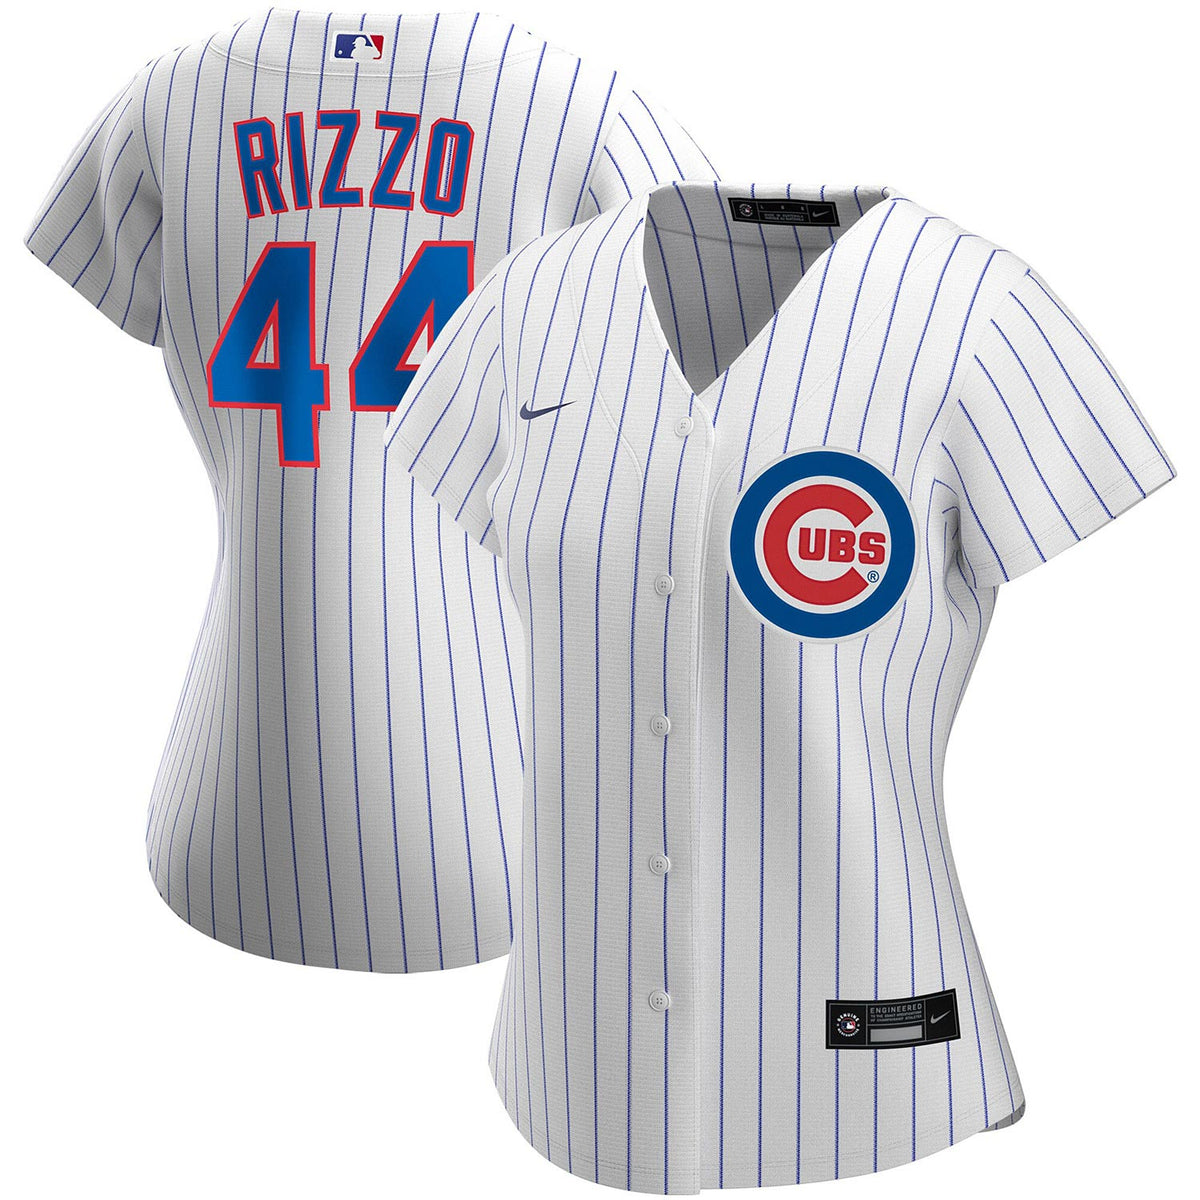 MLB Chicago Cubs (Anthony Rizzo) Men's Replica Baseball Jersey.